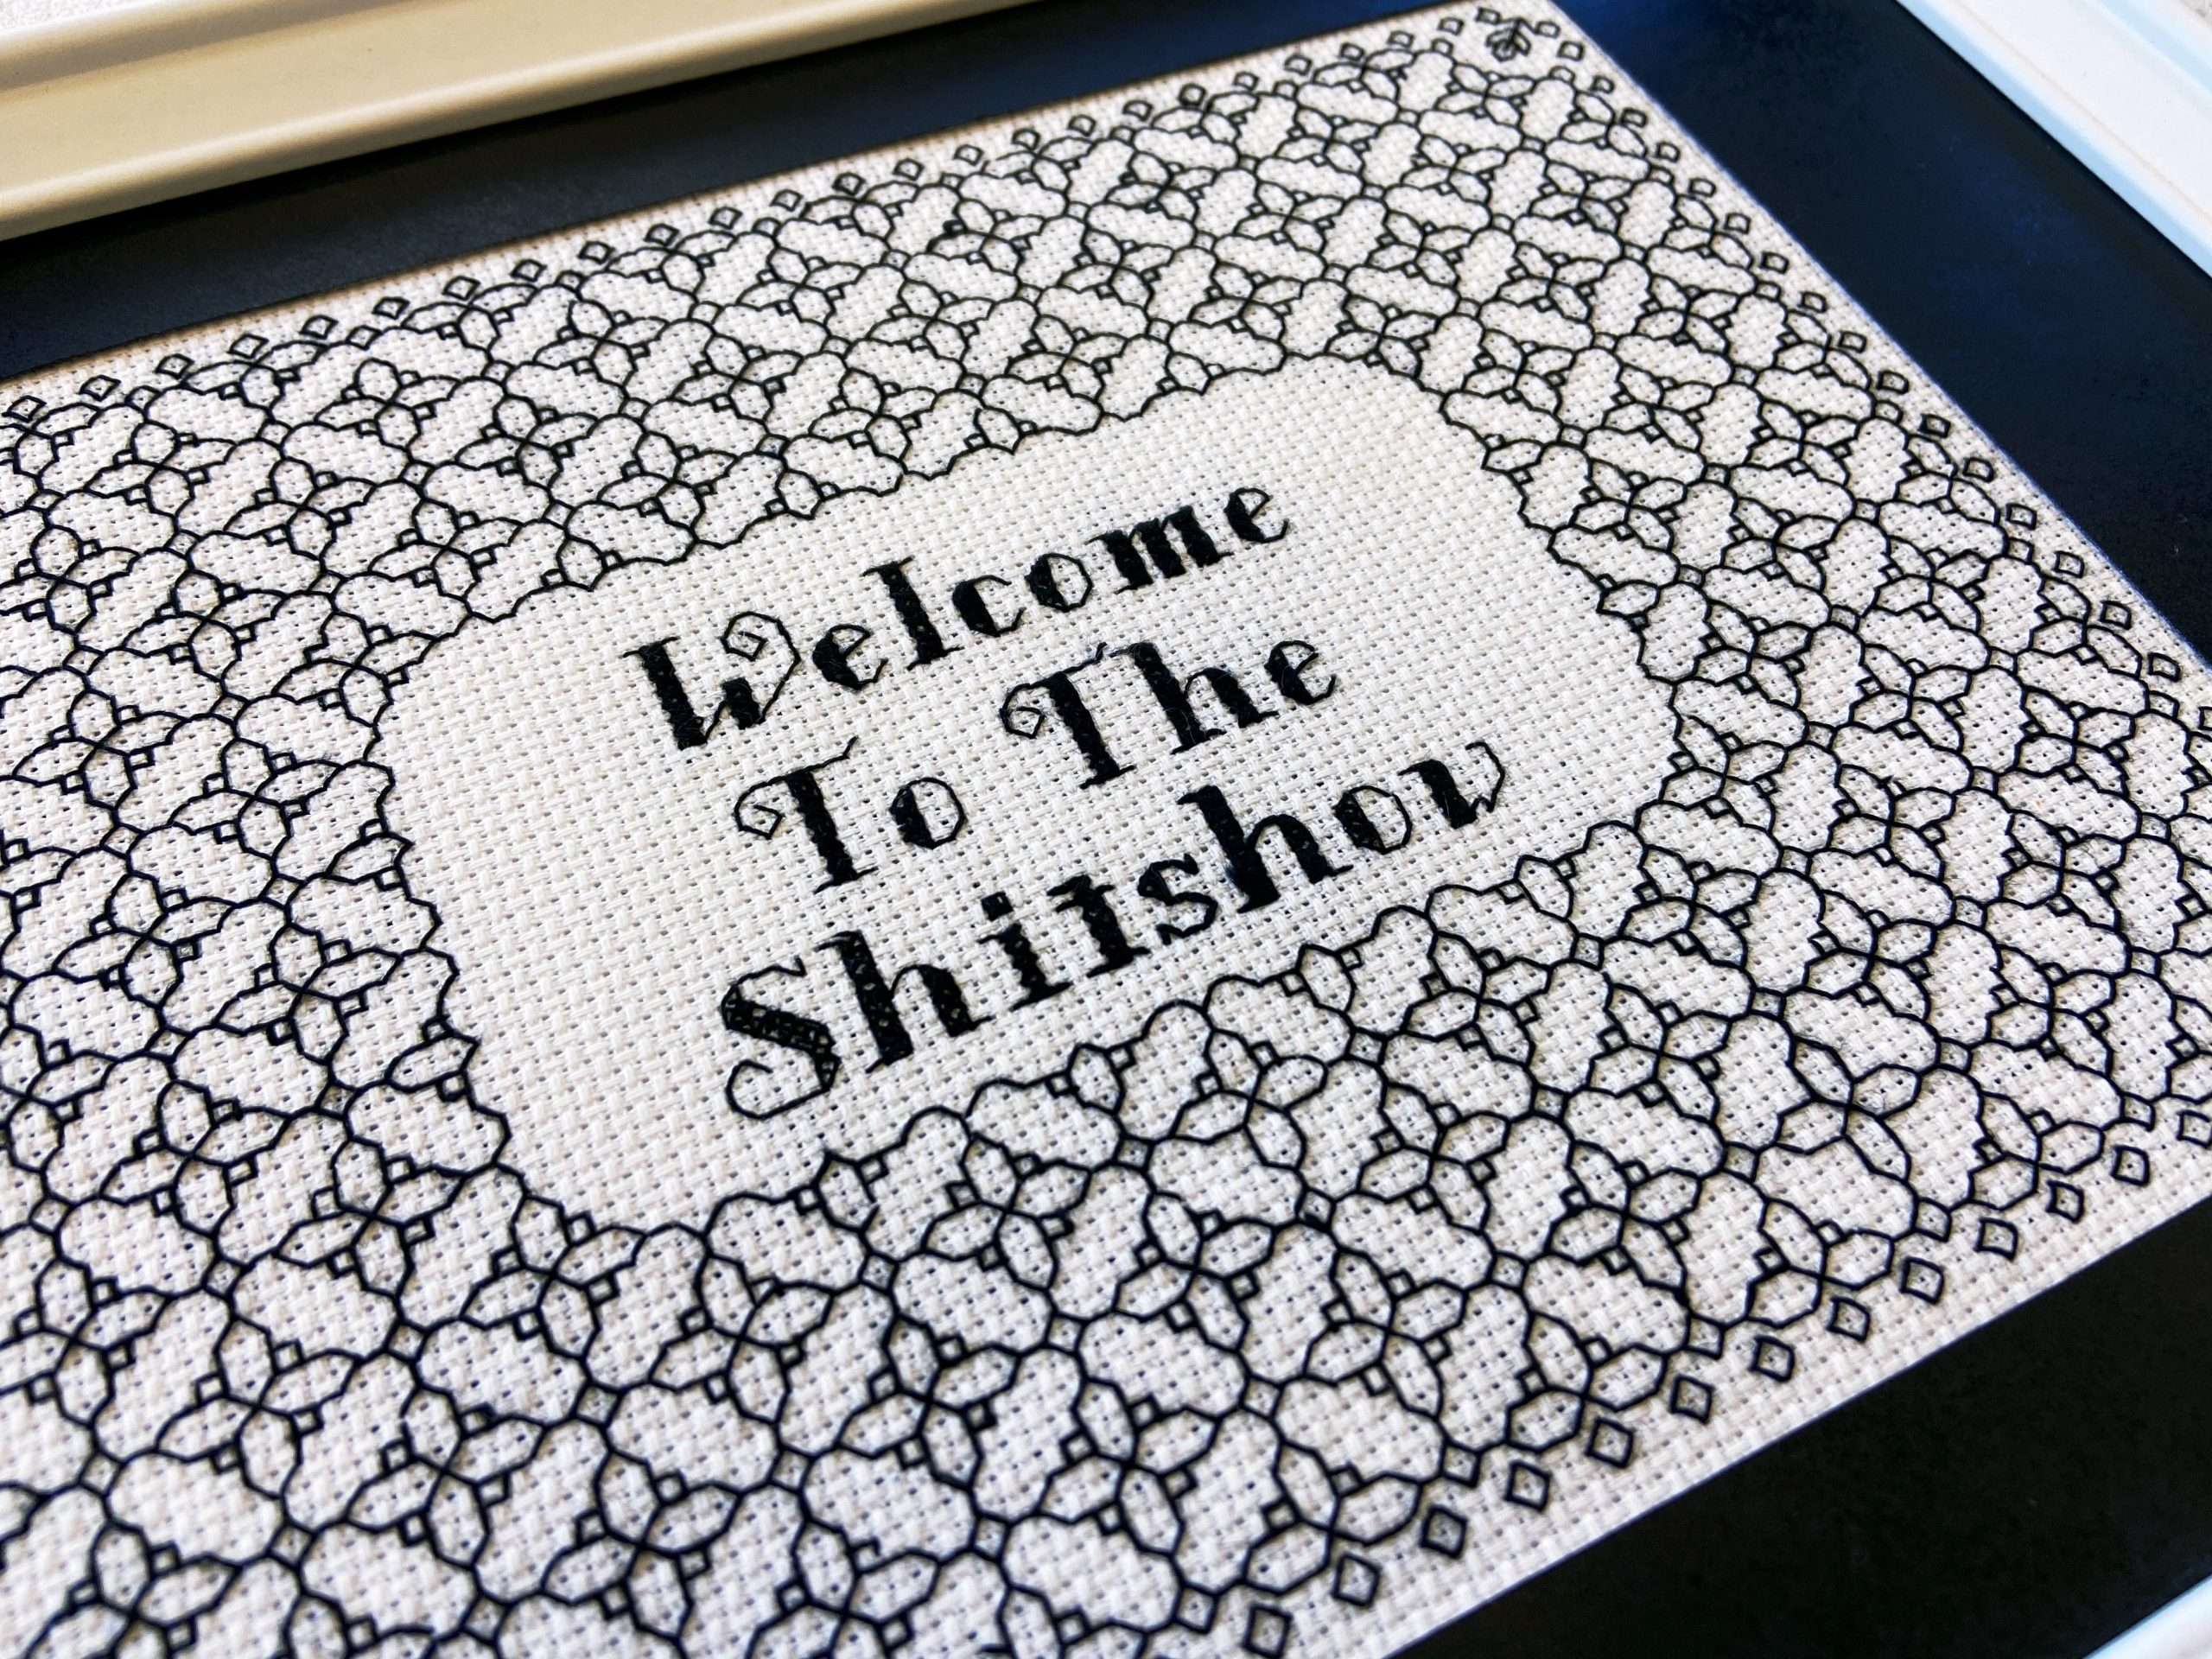 Welcome to the Shitshow - Cross Stitch Kit And Pattern